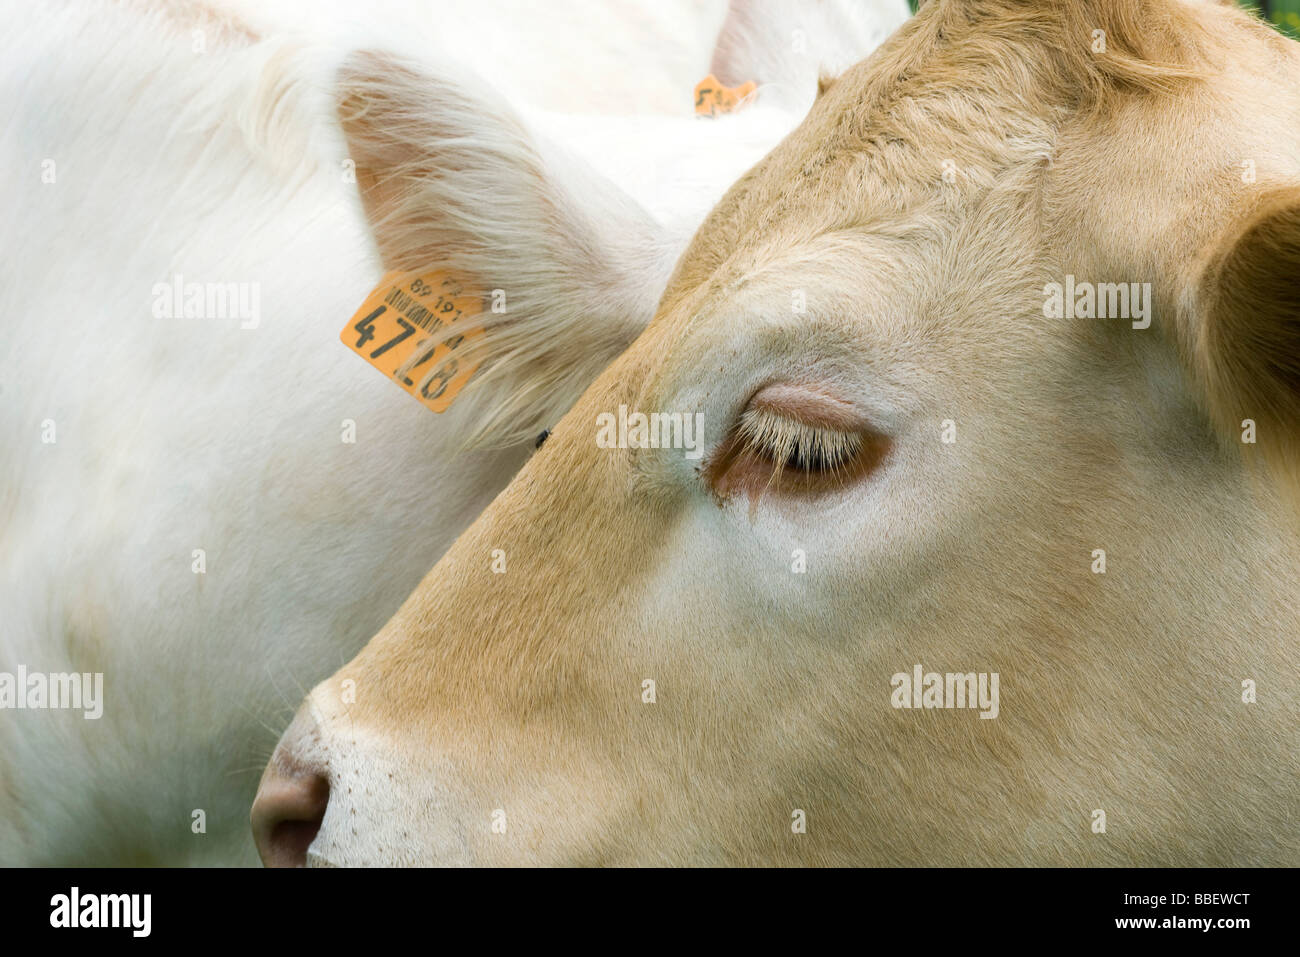 Cow with ear tag, close-up Stock Photo